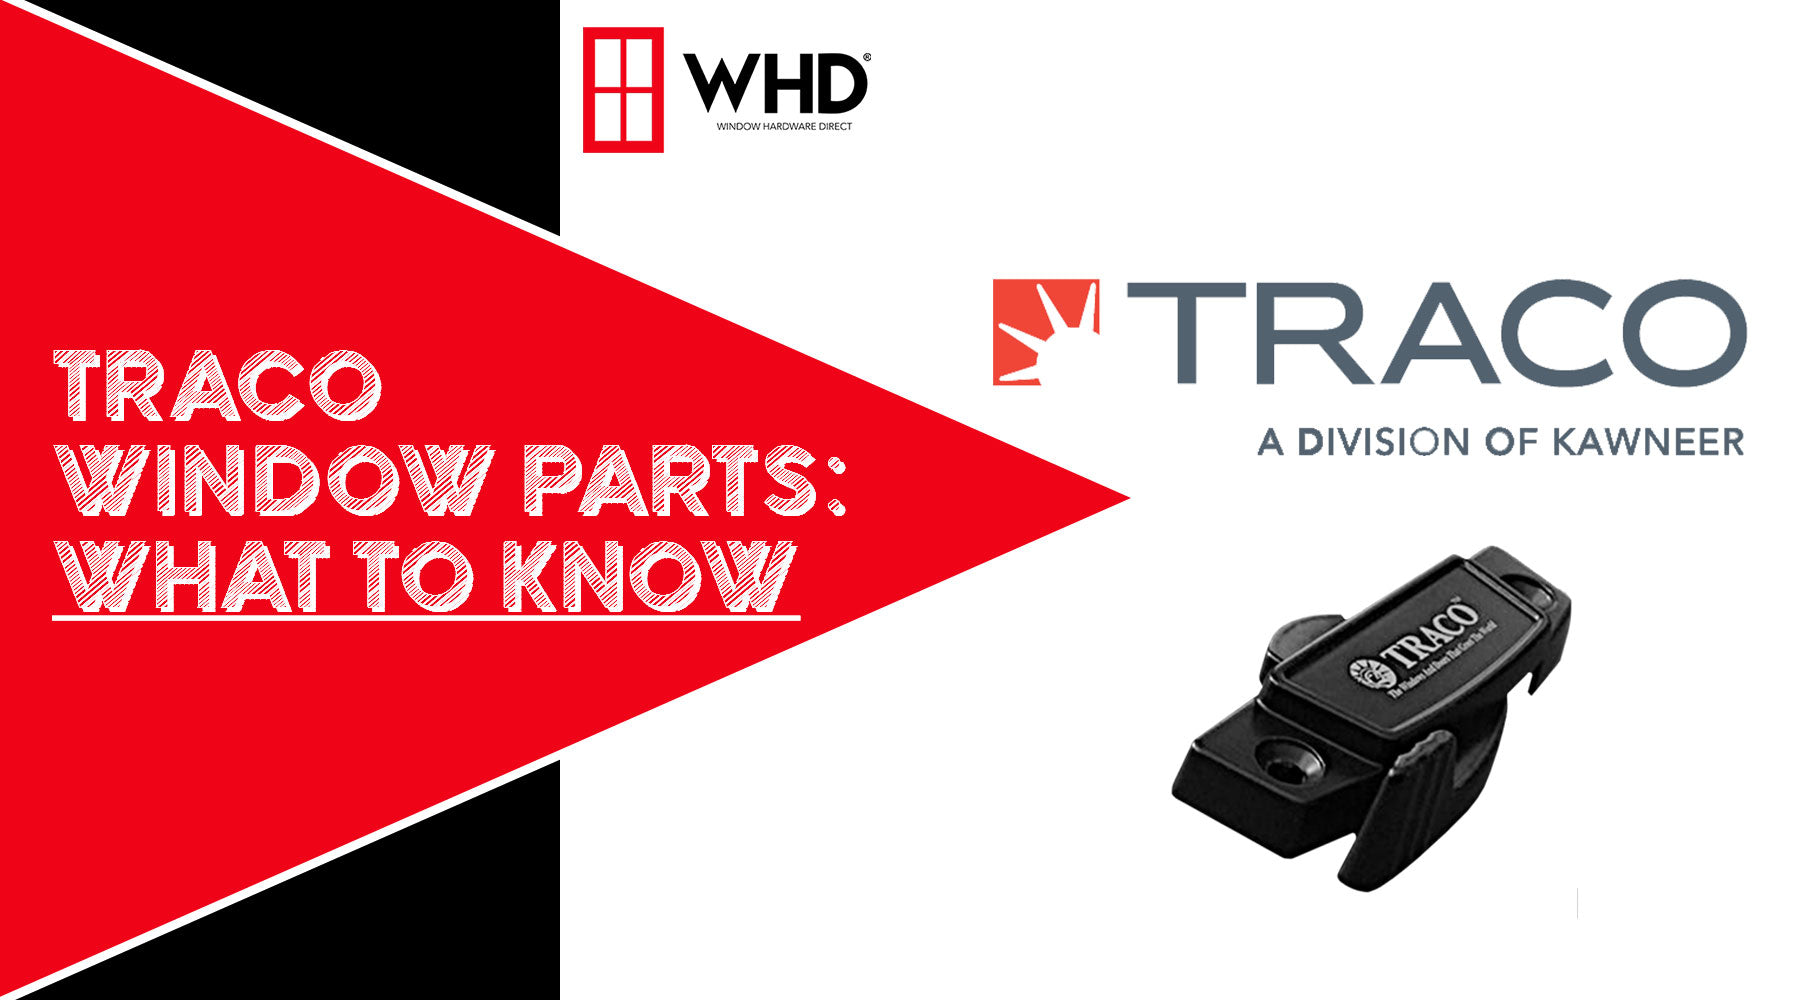 Traco Window Parts: Everything You Need to Know